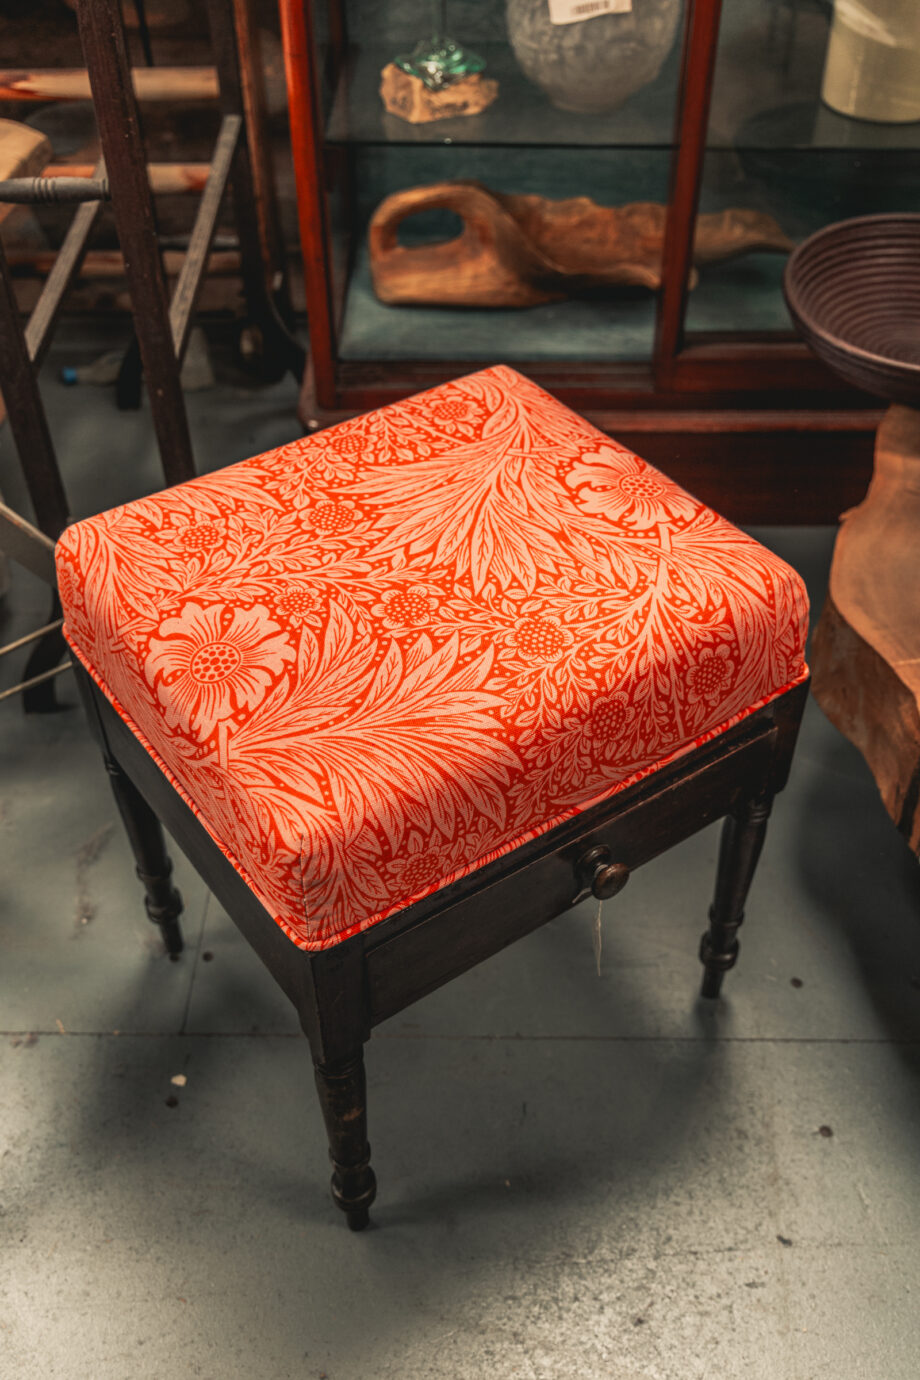 A wooden stool reupholstered with bright orange fabric